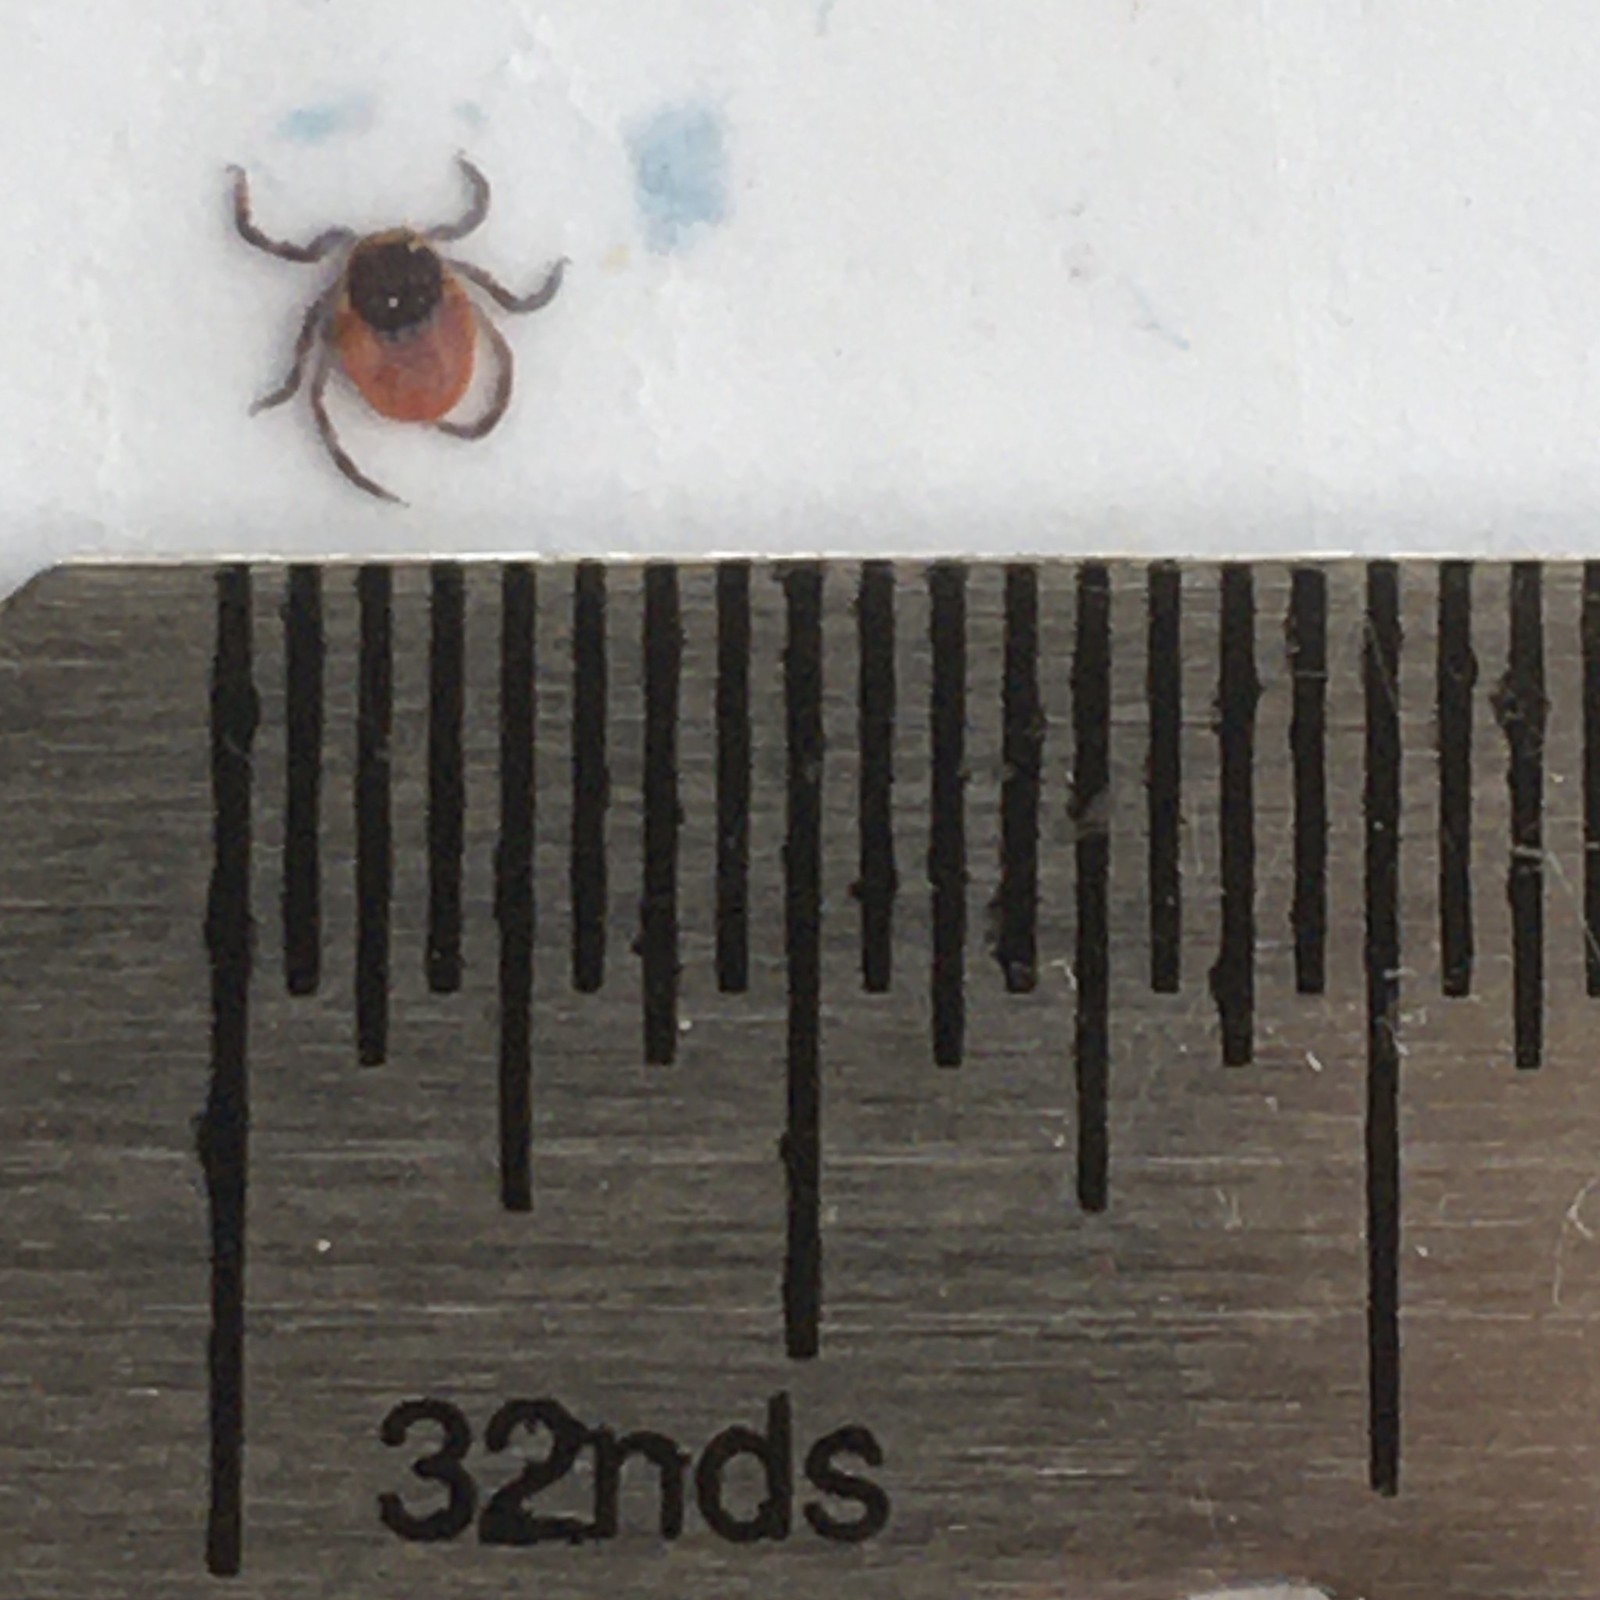 Tick from April 7, 2020